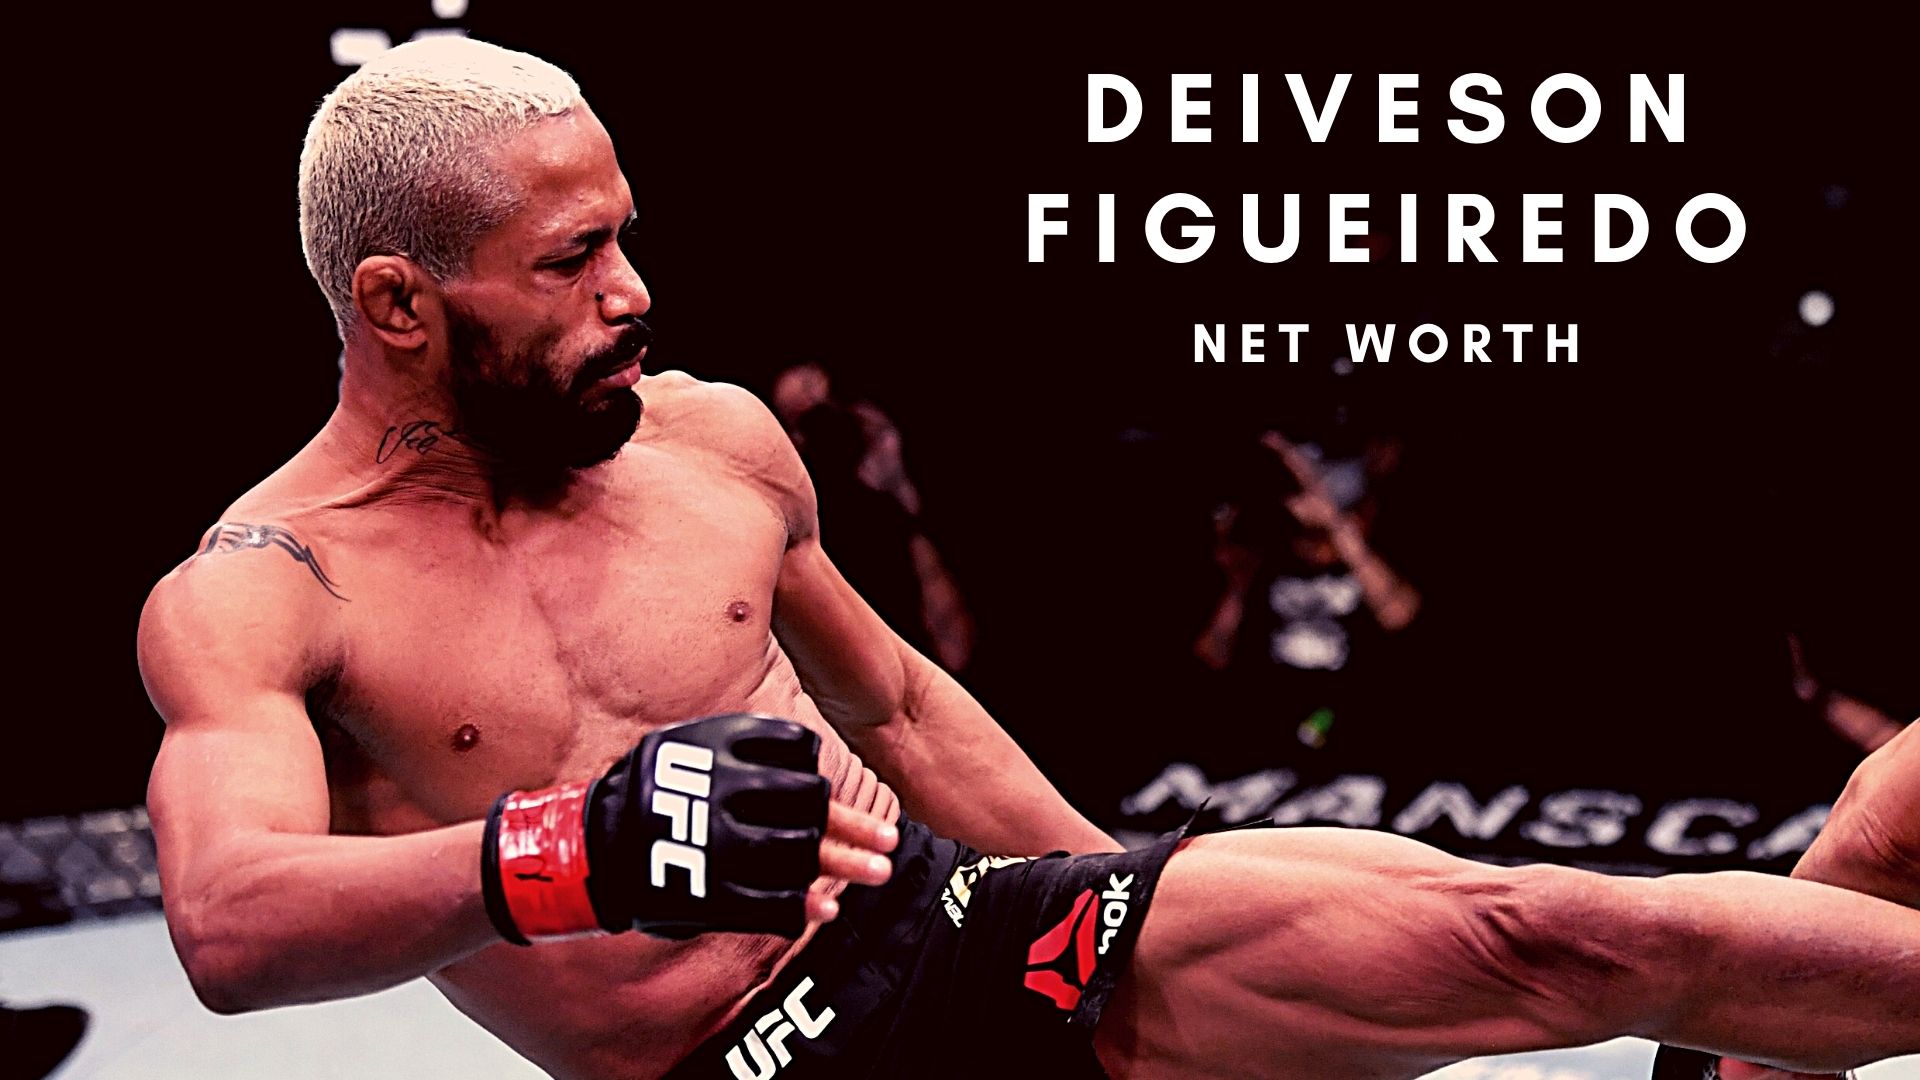 Deiveson Figueiredo is one of the top stars in the UFC and has amassed a huge net worth too